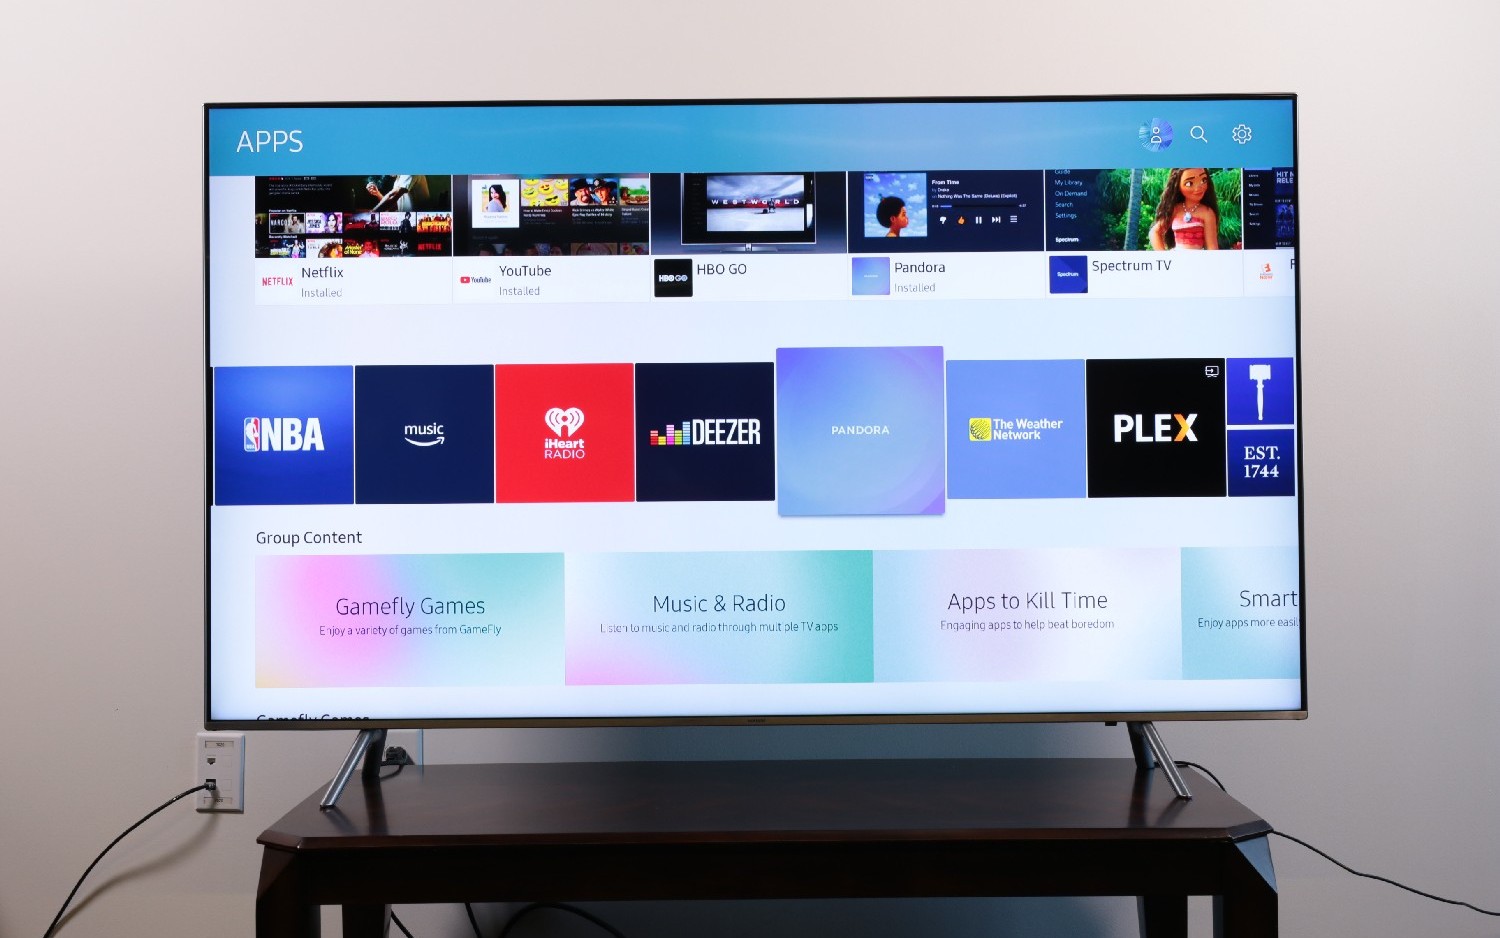 How to Find and Install Apps on 2018 Samsung TVs - Samsung TV Settings ...